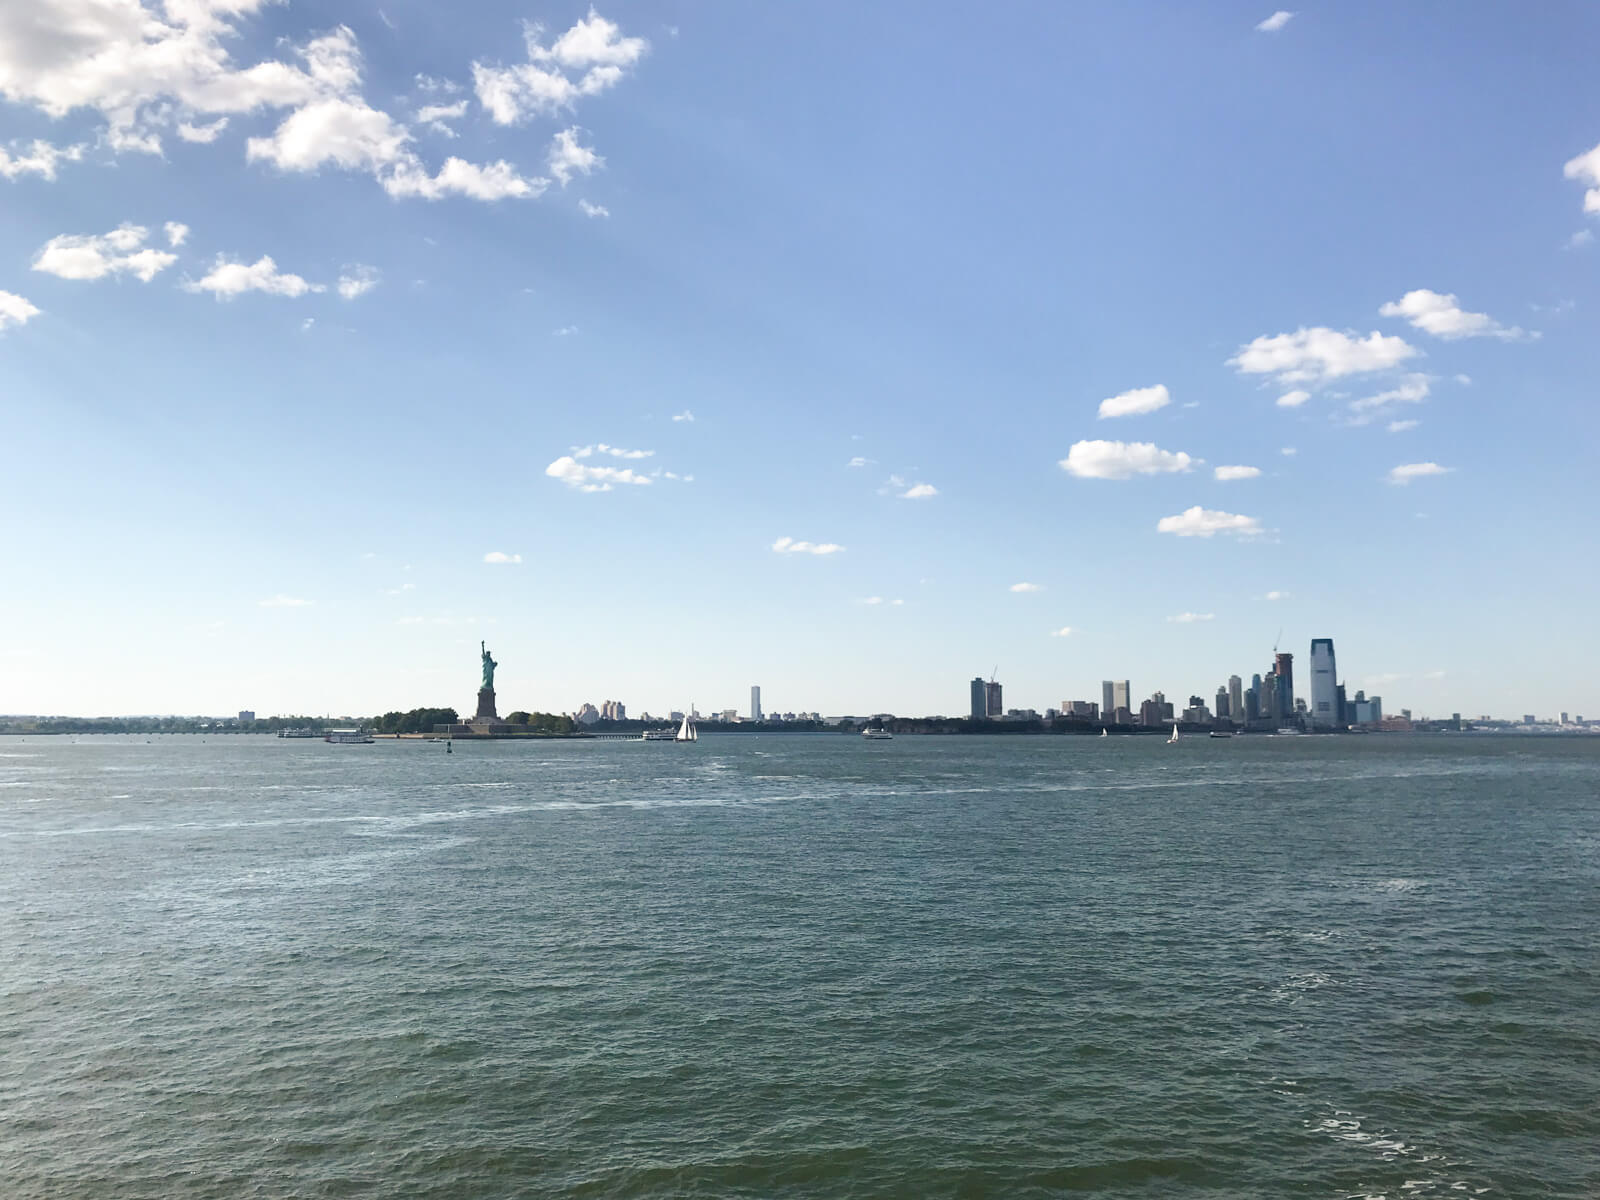 New York City with high-rise buildings and the Statue of Liberty as seen from the water on a ferry. The sky is a dim blue with some clouds to the left of frame.